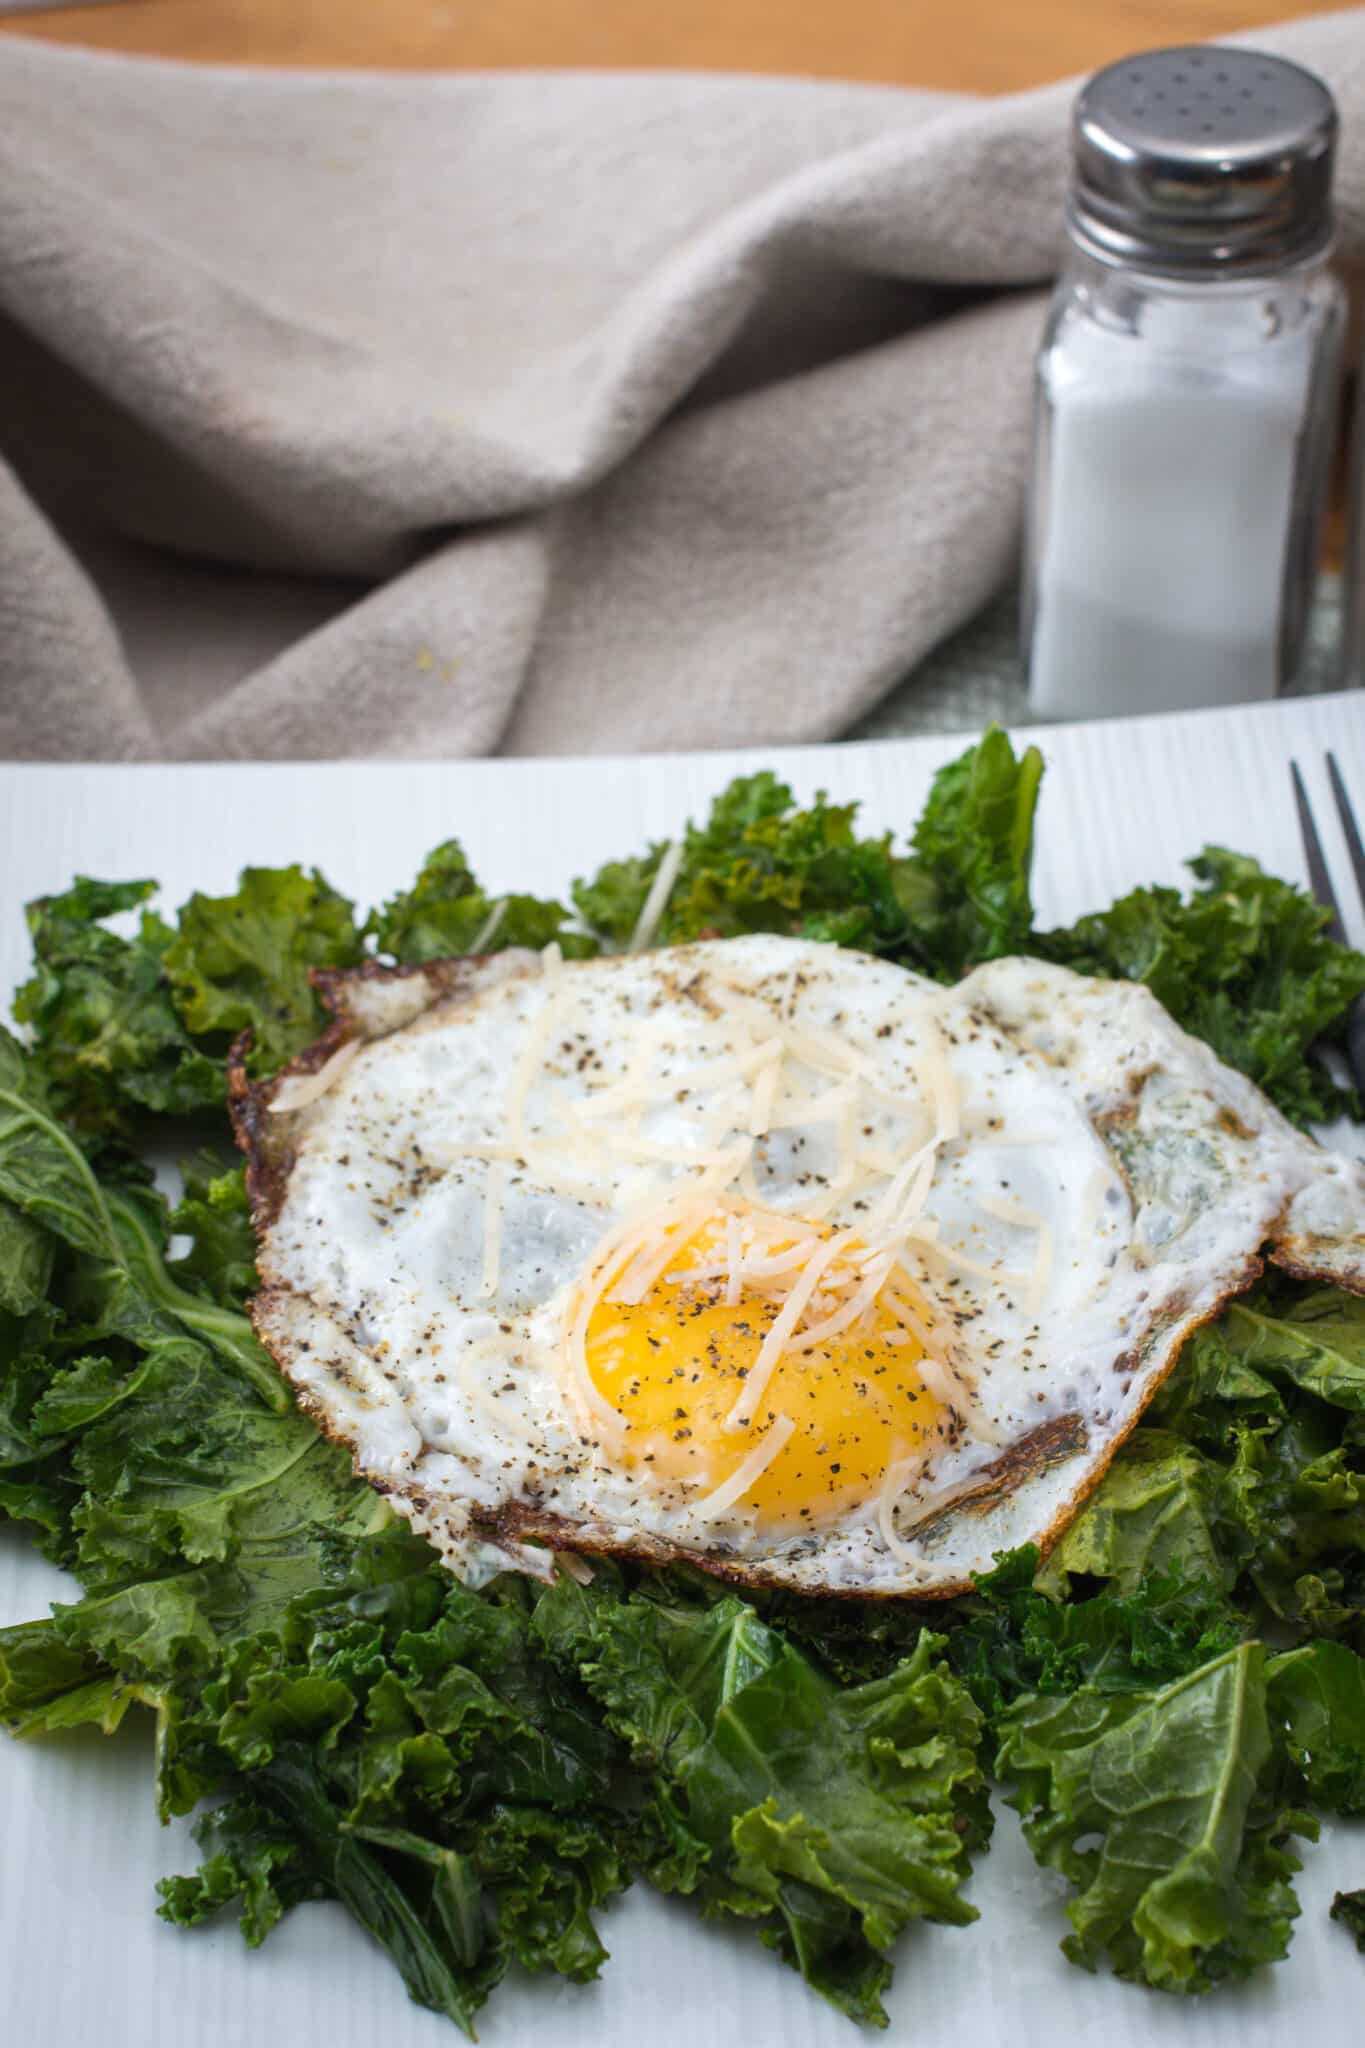 Fried Eggs on Kale bed